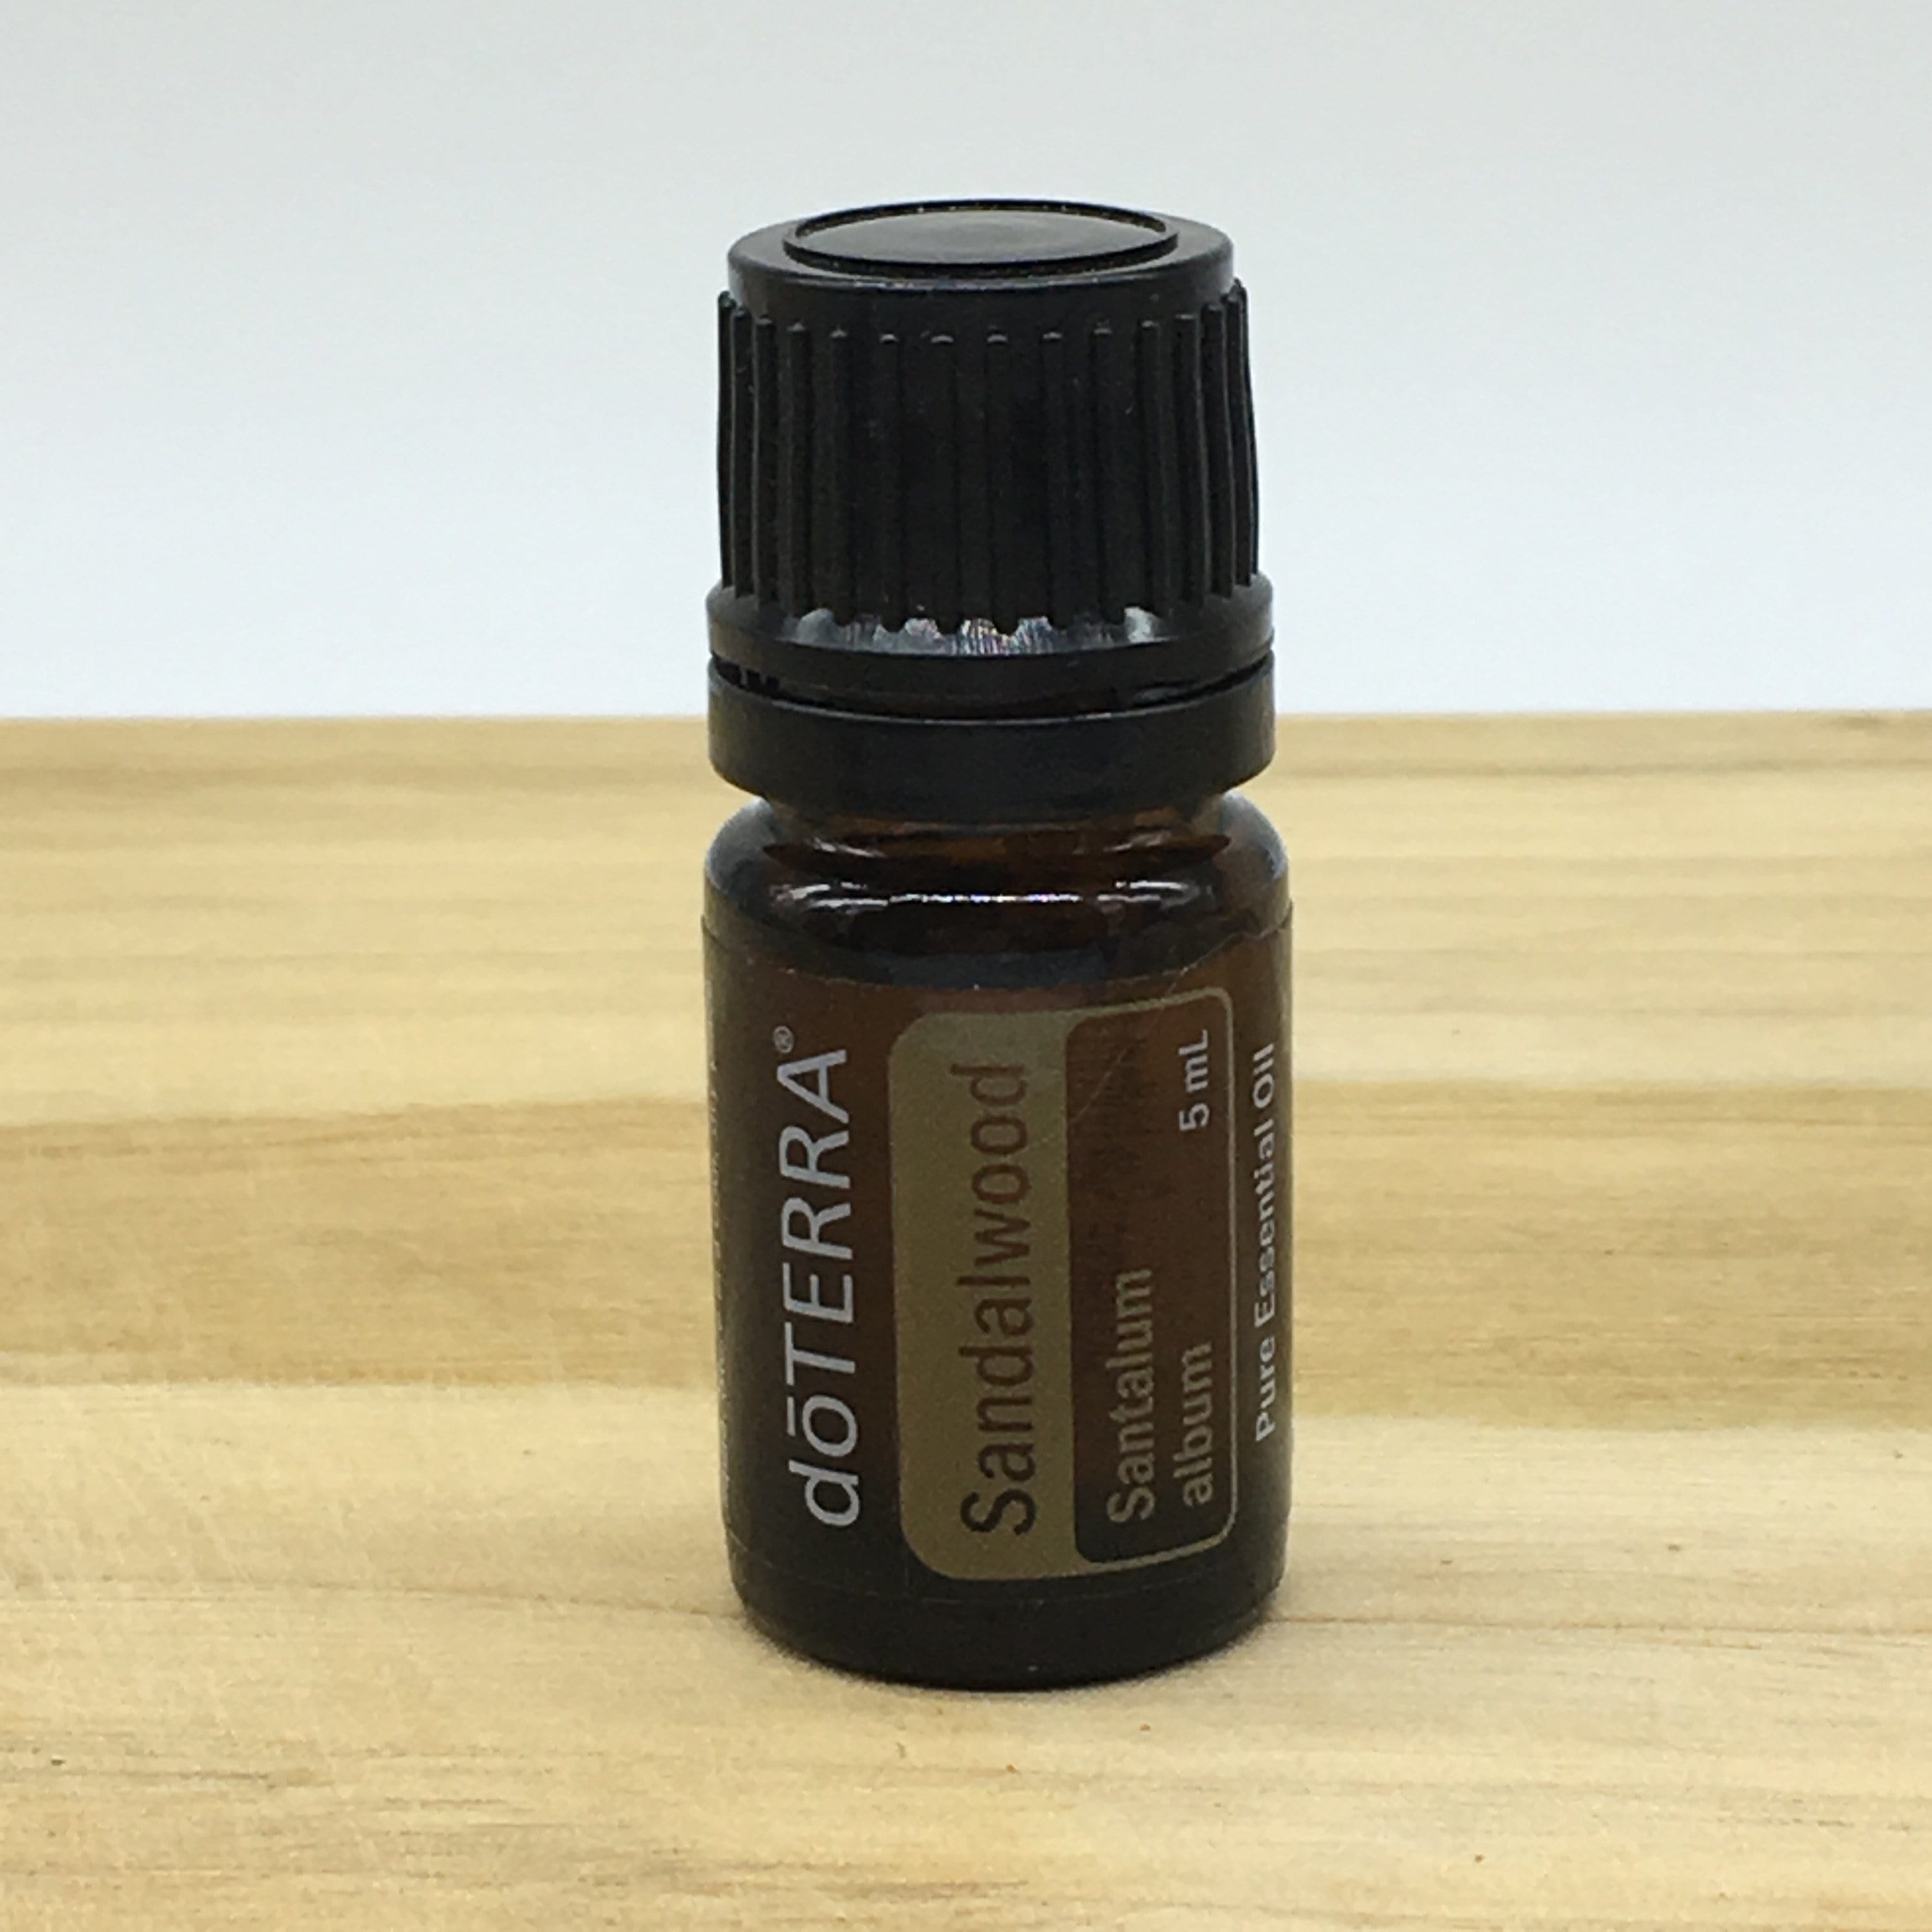 doTERRA Sandalwood 5ml Essential Oil - Earth And Soul